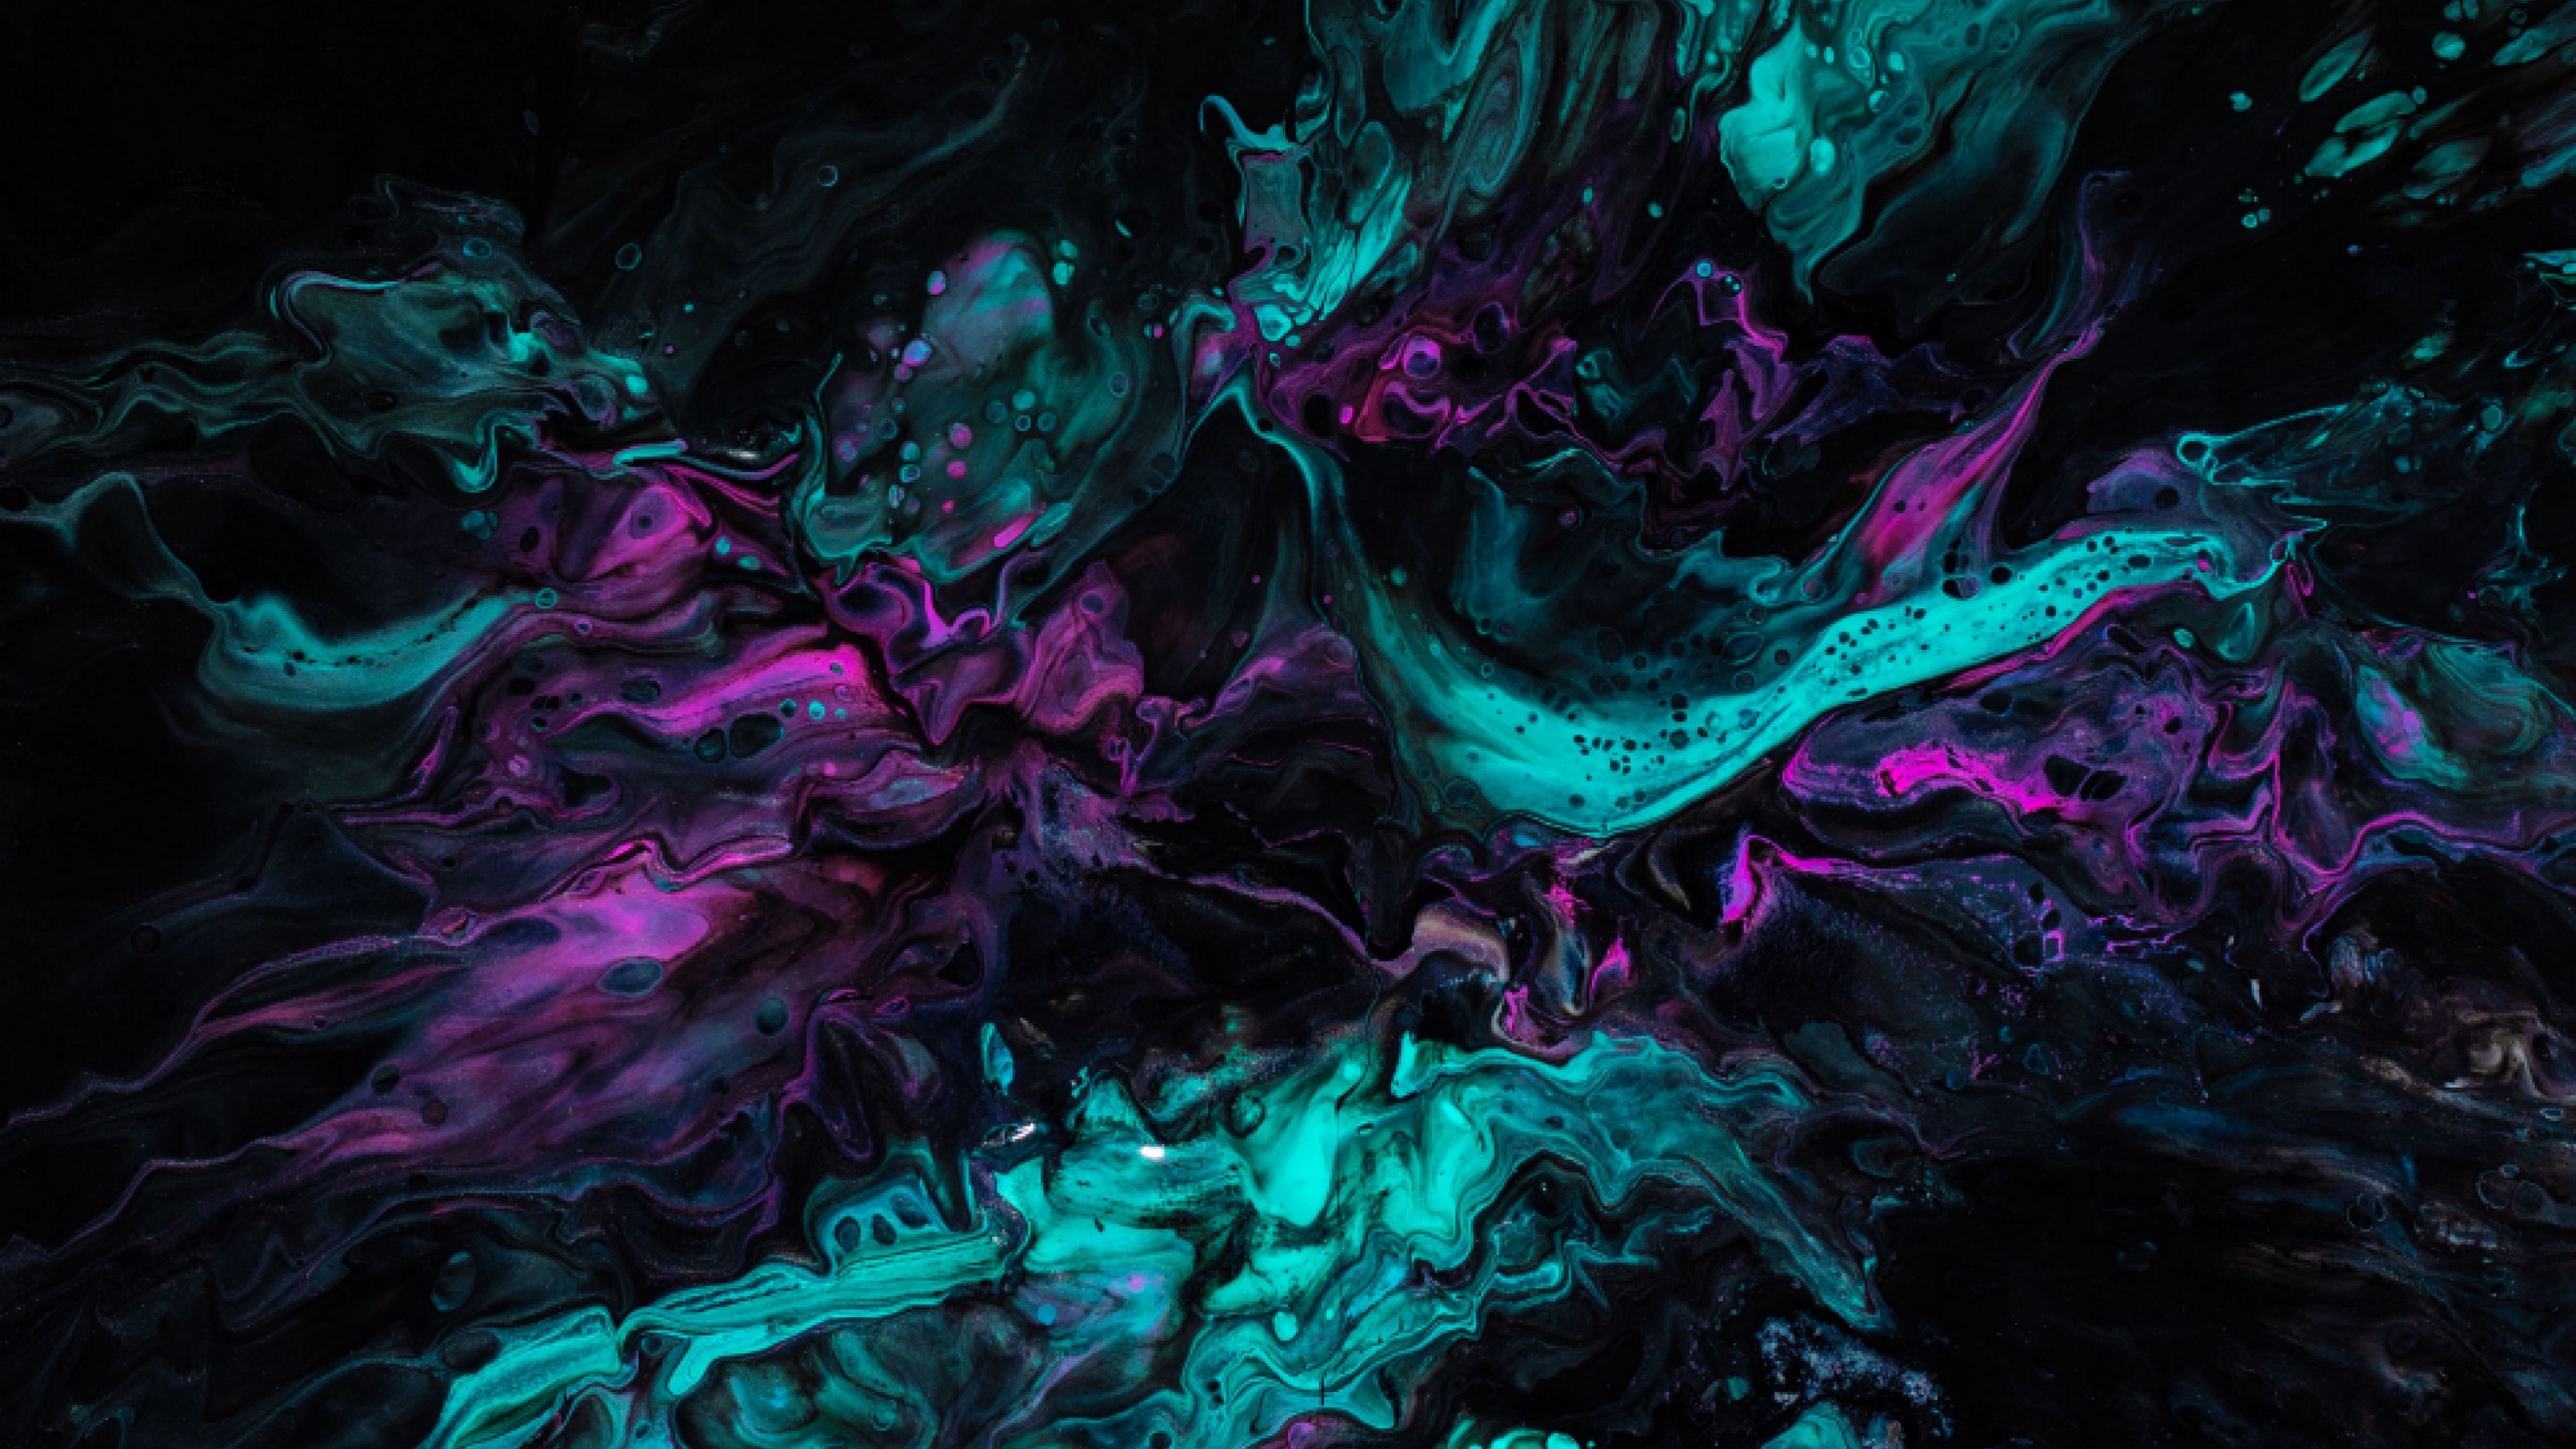 Black And Teal Wallpapers 4k Hd Black And Teal Backgrounds On Wallpaperbat